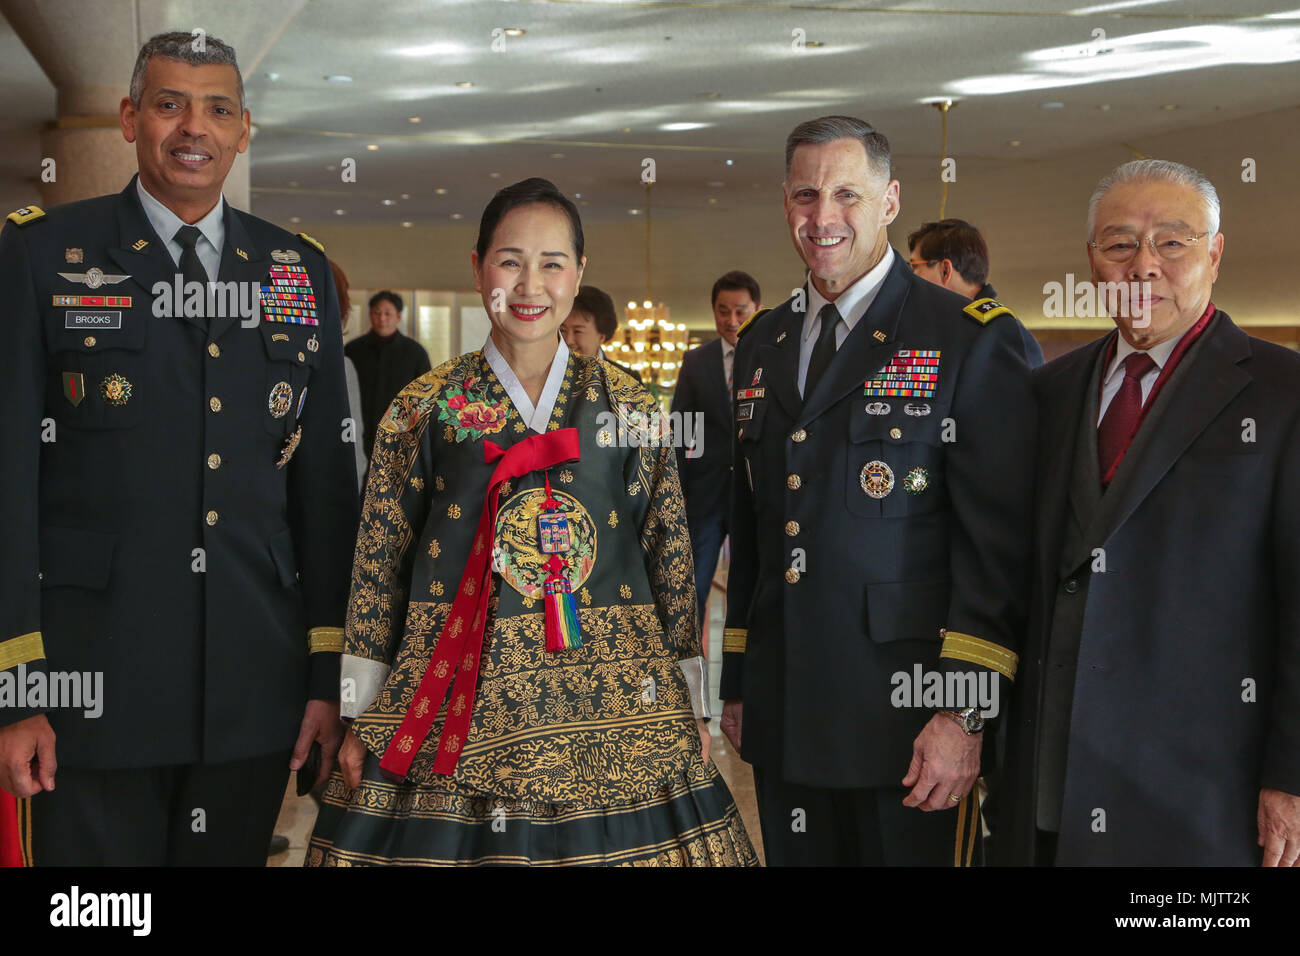 U.S Army Lt. Gen. Thomas S. Vandal, commander of Eighth Army, and Gen. Vincent Brooks, commander U.S Forces Korea, pose with community leaders before the Holiday concert in Seoul, Korea Dec. 17, 2017. The concert was hosted by the Eighth Army command in conjunction with local community leaders during the holiday season to promote harmonious relations between the U.S. Army and the Republic of Korea (ROK). Over 1500 U.S. Soldiers and ROK soldiers attended performances by the Eighth Army Band and the Prime Philharmonic Orchestra . (U.S. Army photo by Pfc. Edward Randolph) Stock Photo